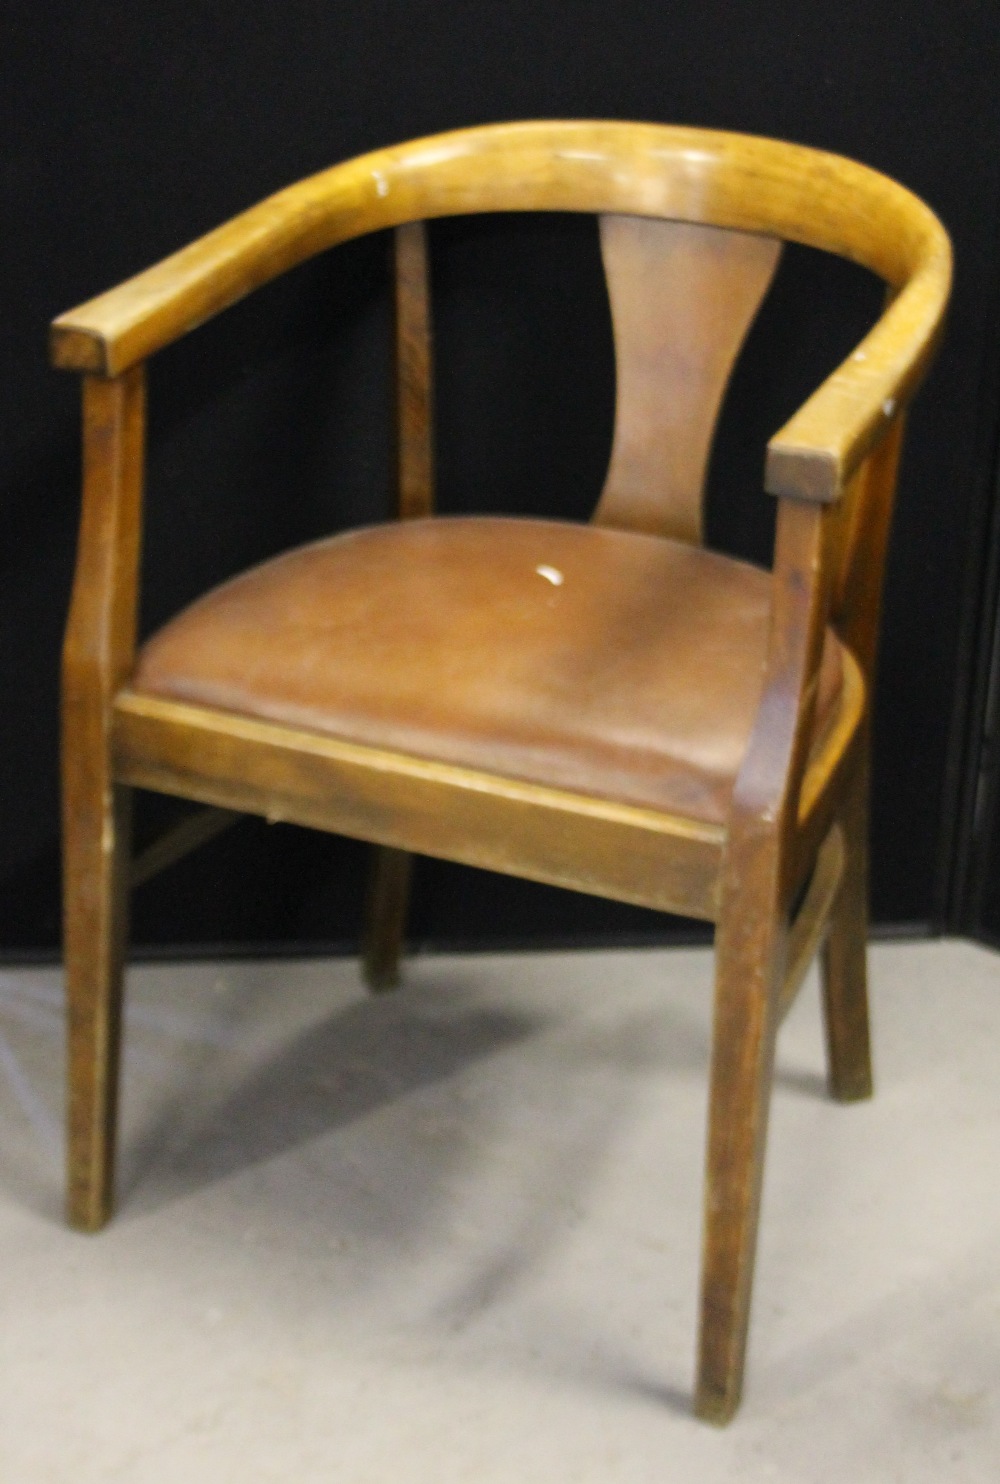 RETRO WOODEN CHAIR - a retro wooden chair with a leather seat by Withy Grove Stores, Manchester.